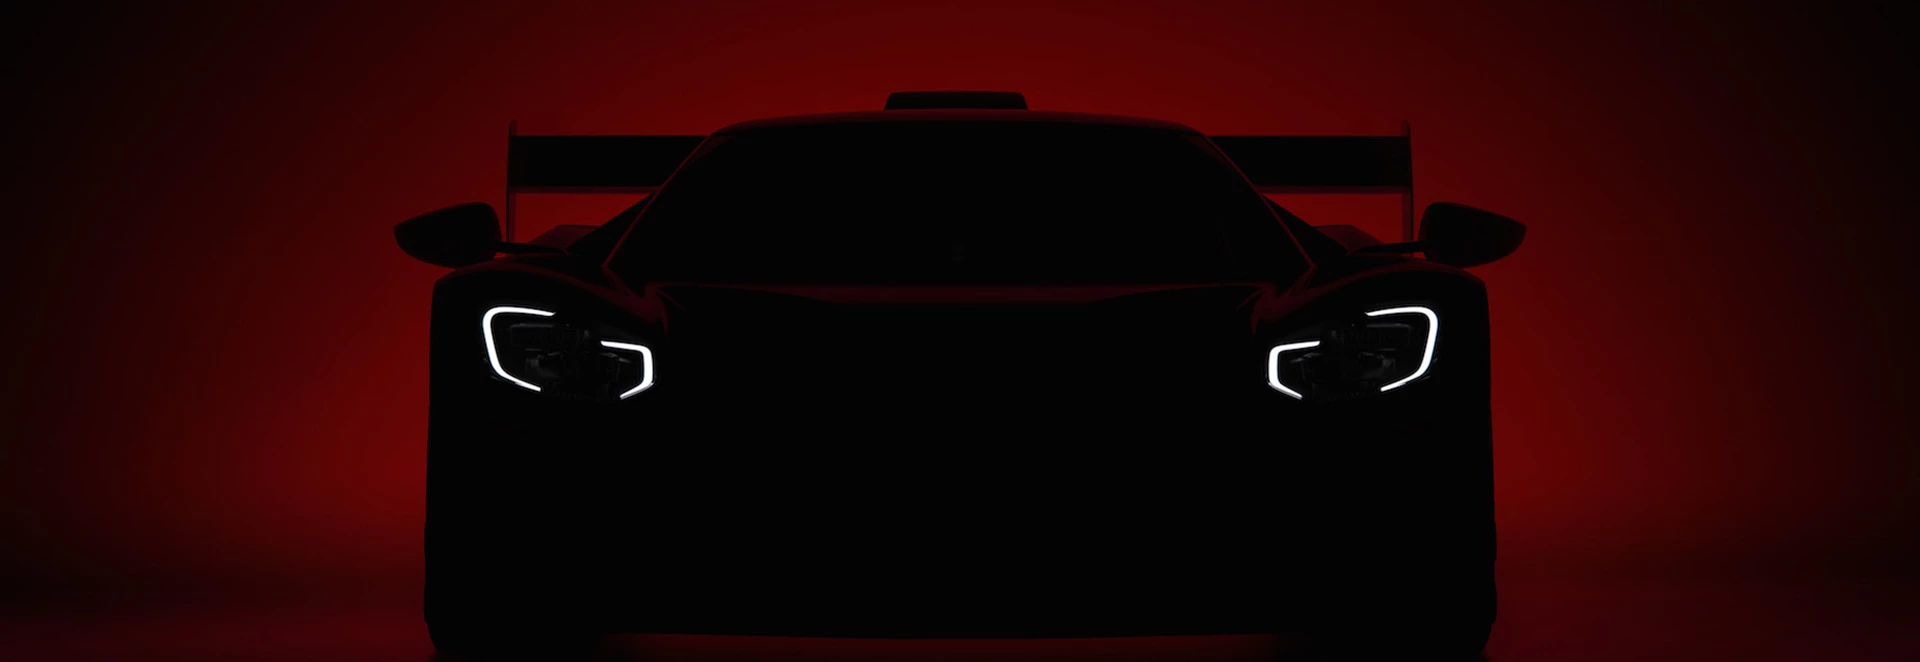 Mystery Ford GT model teased ahead of Goodwood Festival of Speed reveal